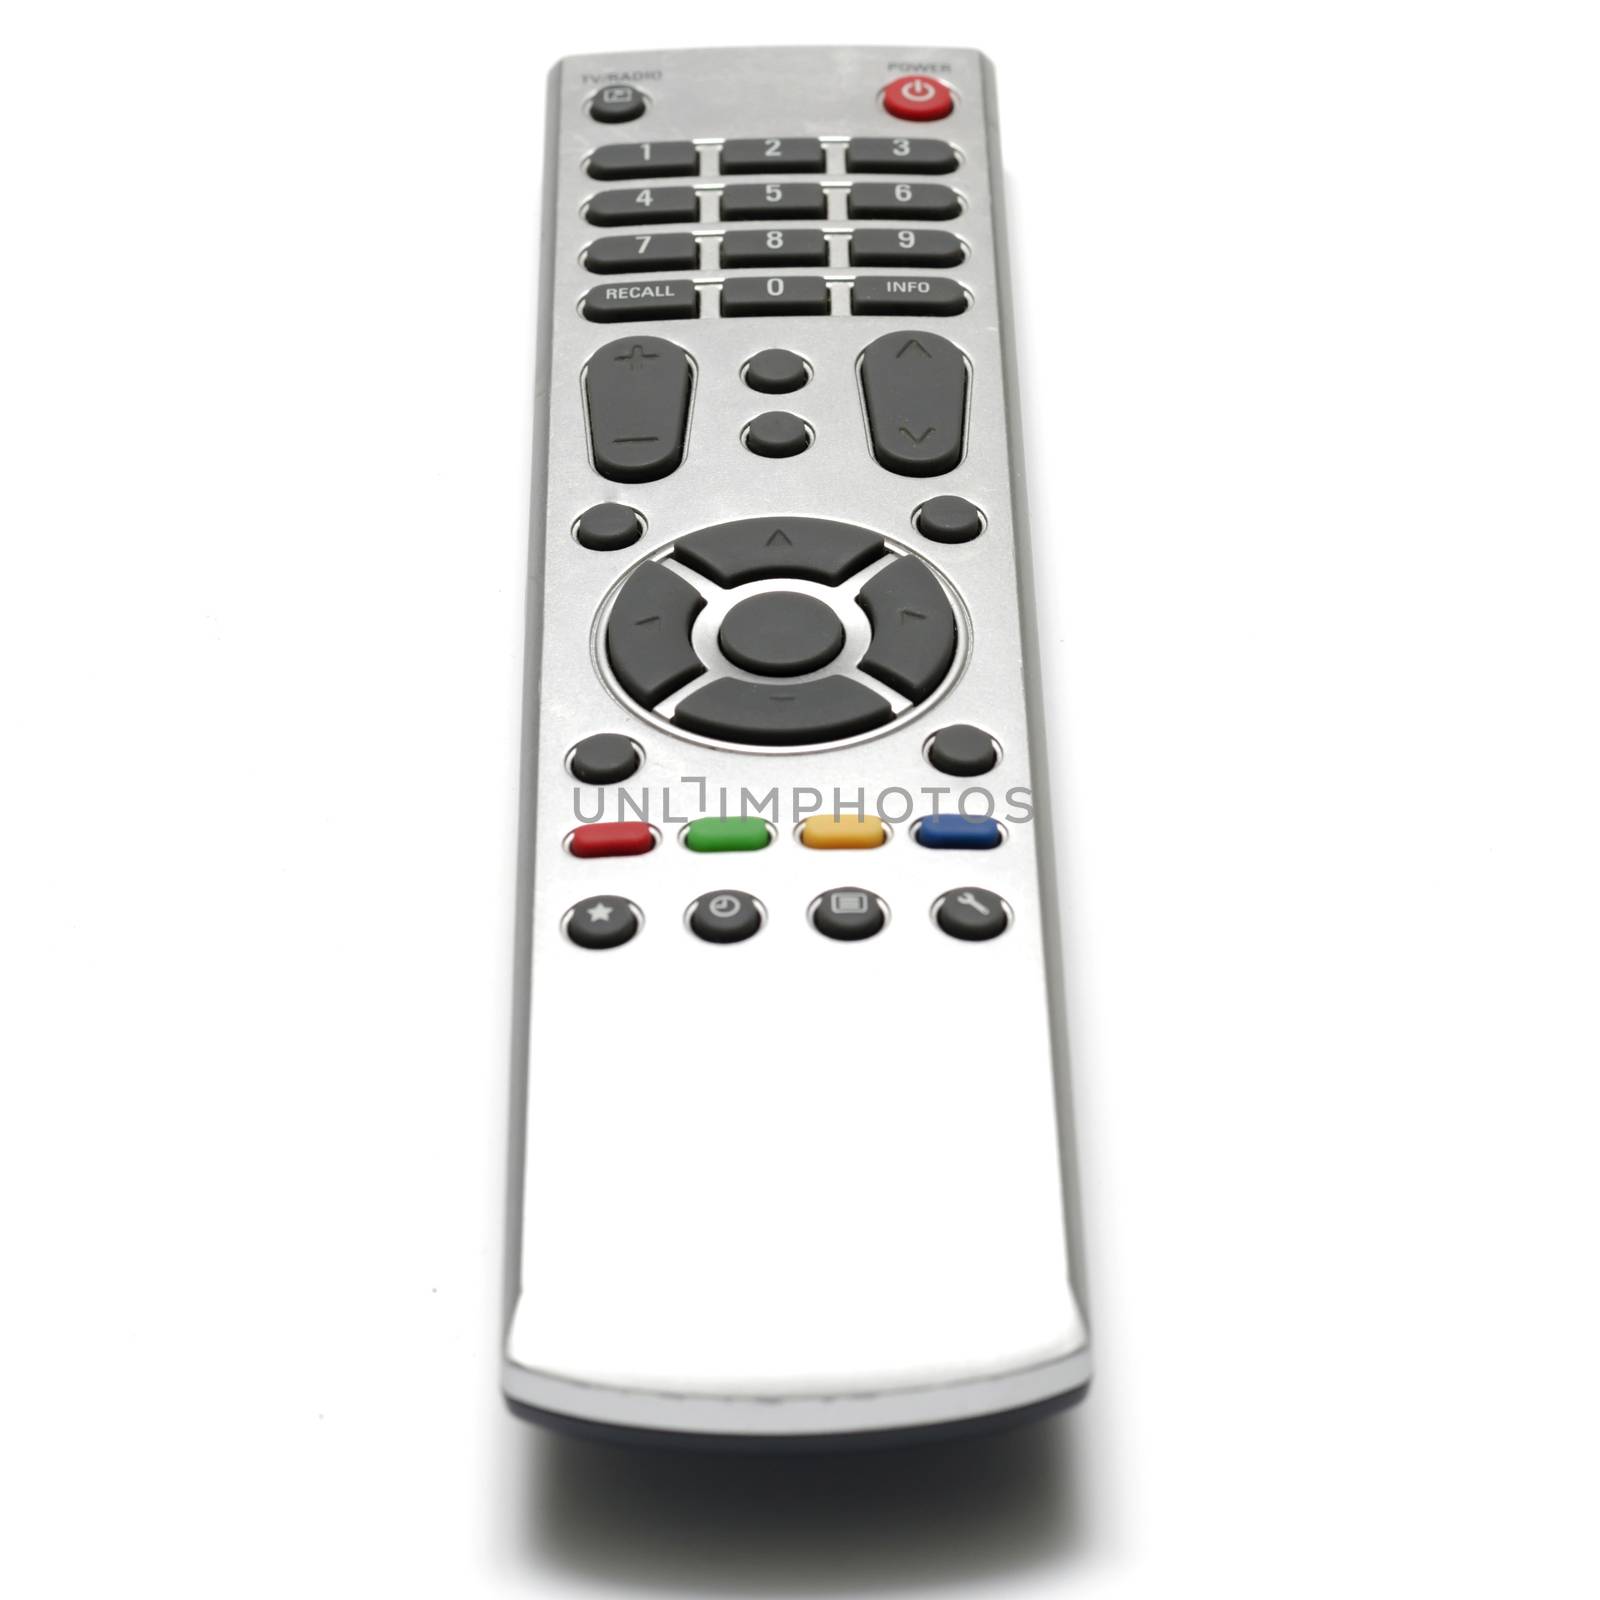 television remote on a white background